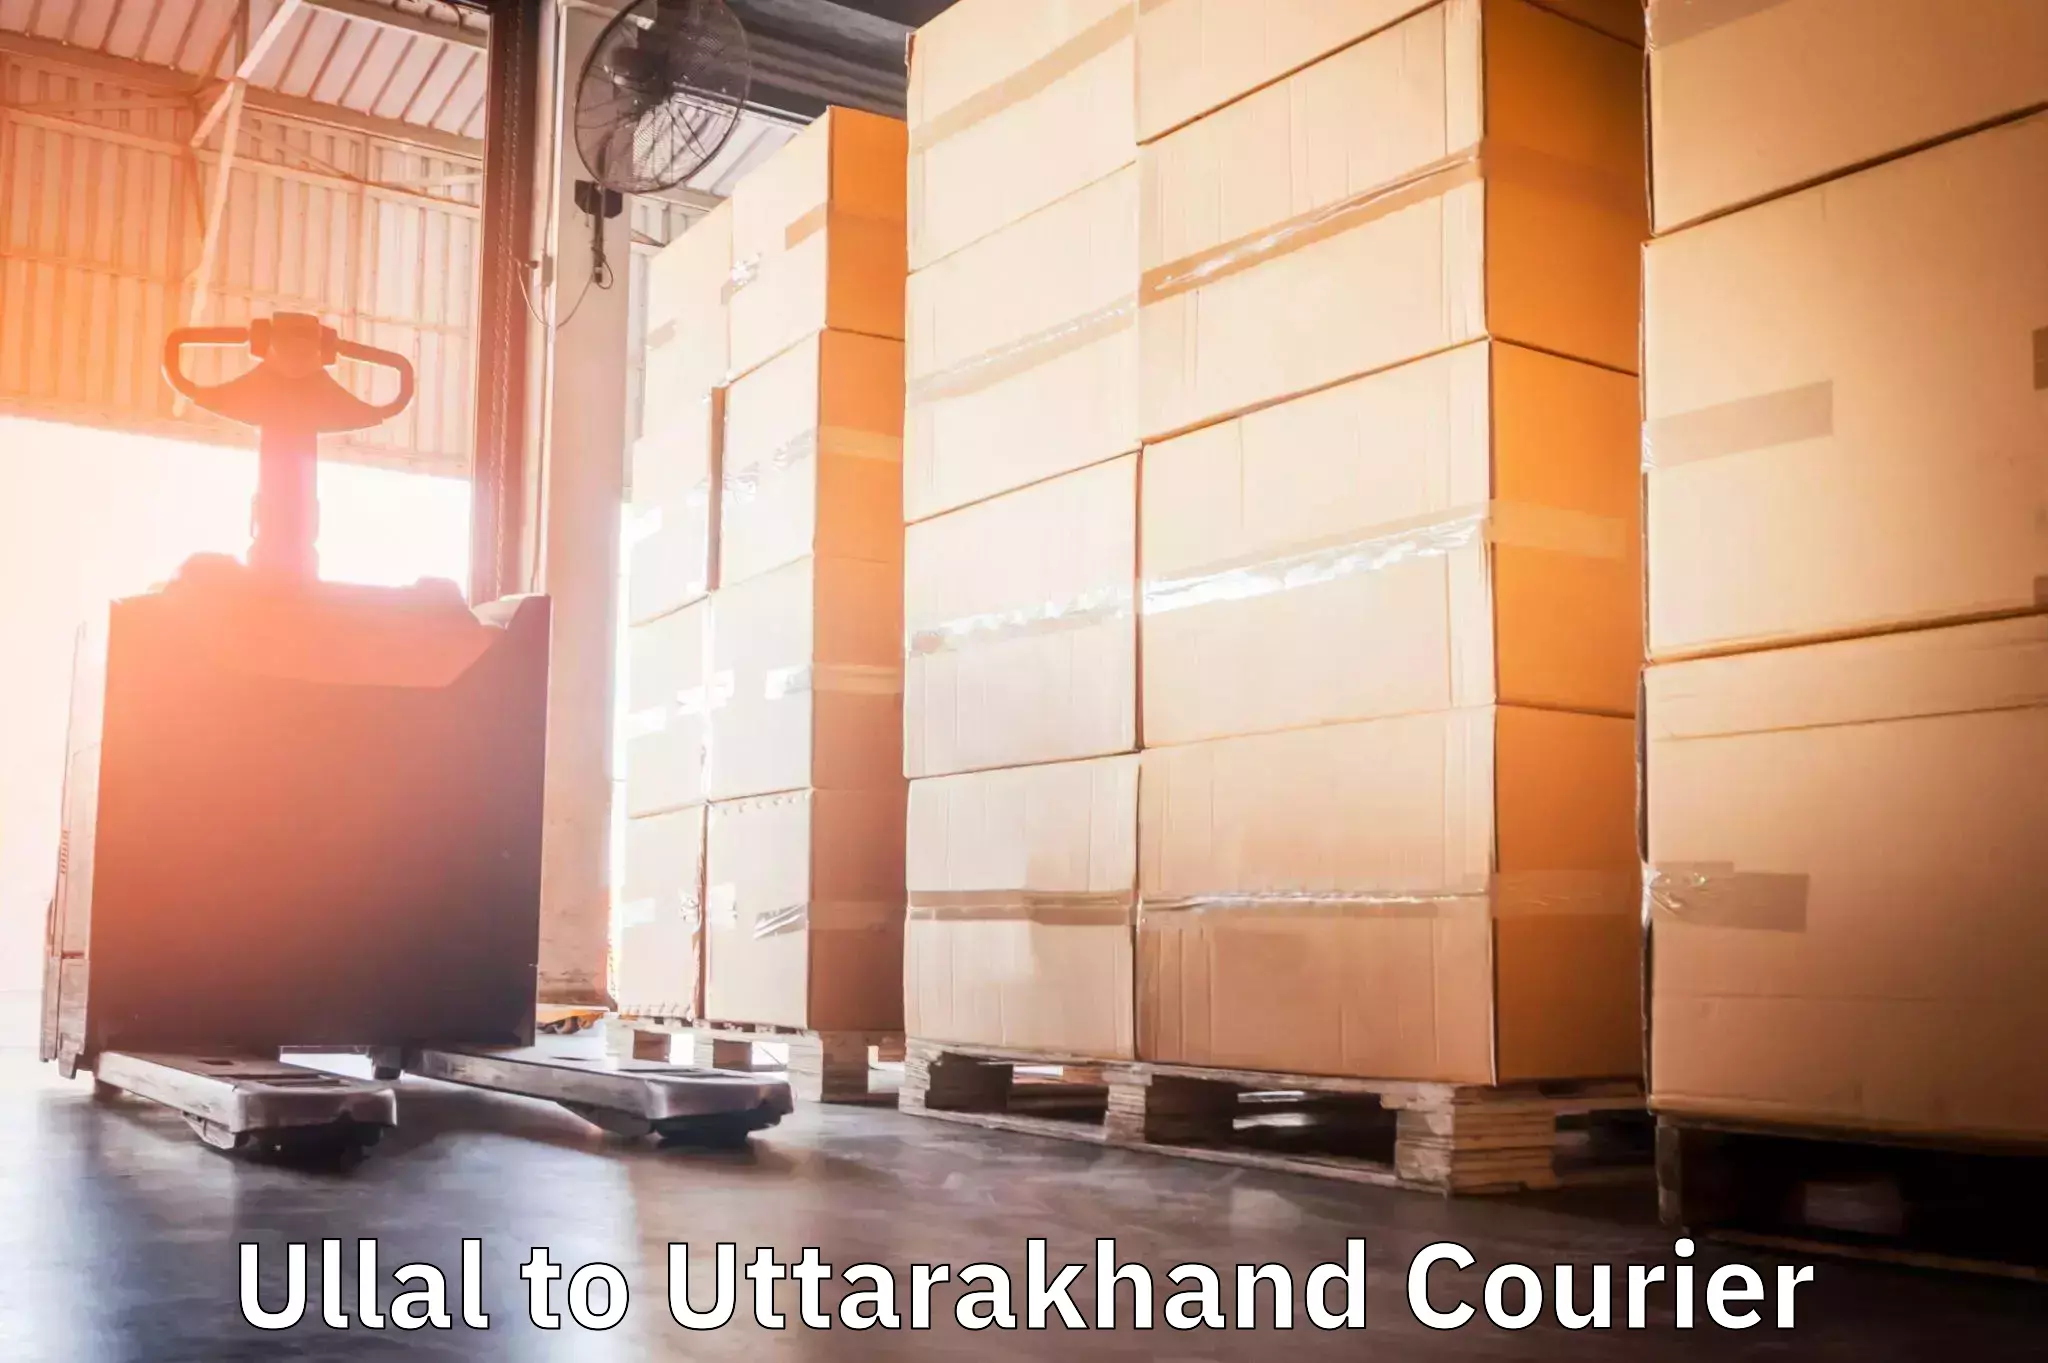 Cargo delivery service Ullal to Uttarakhand